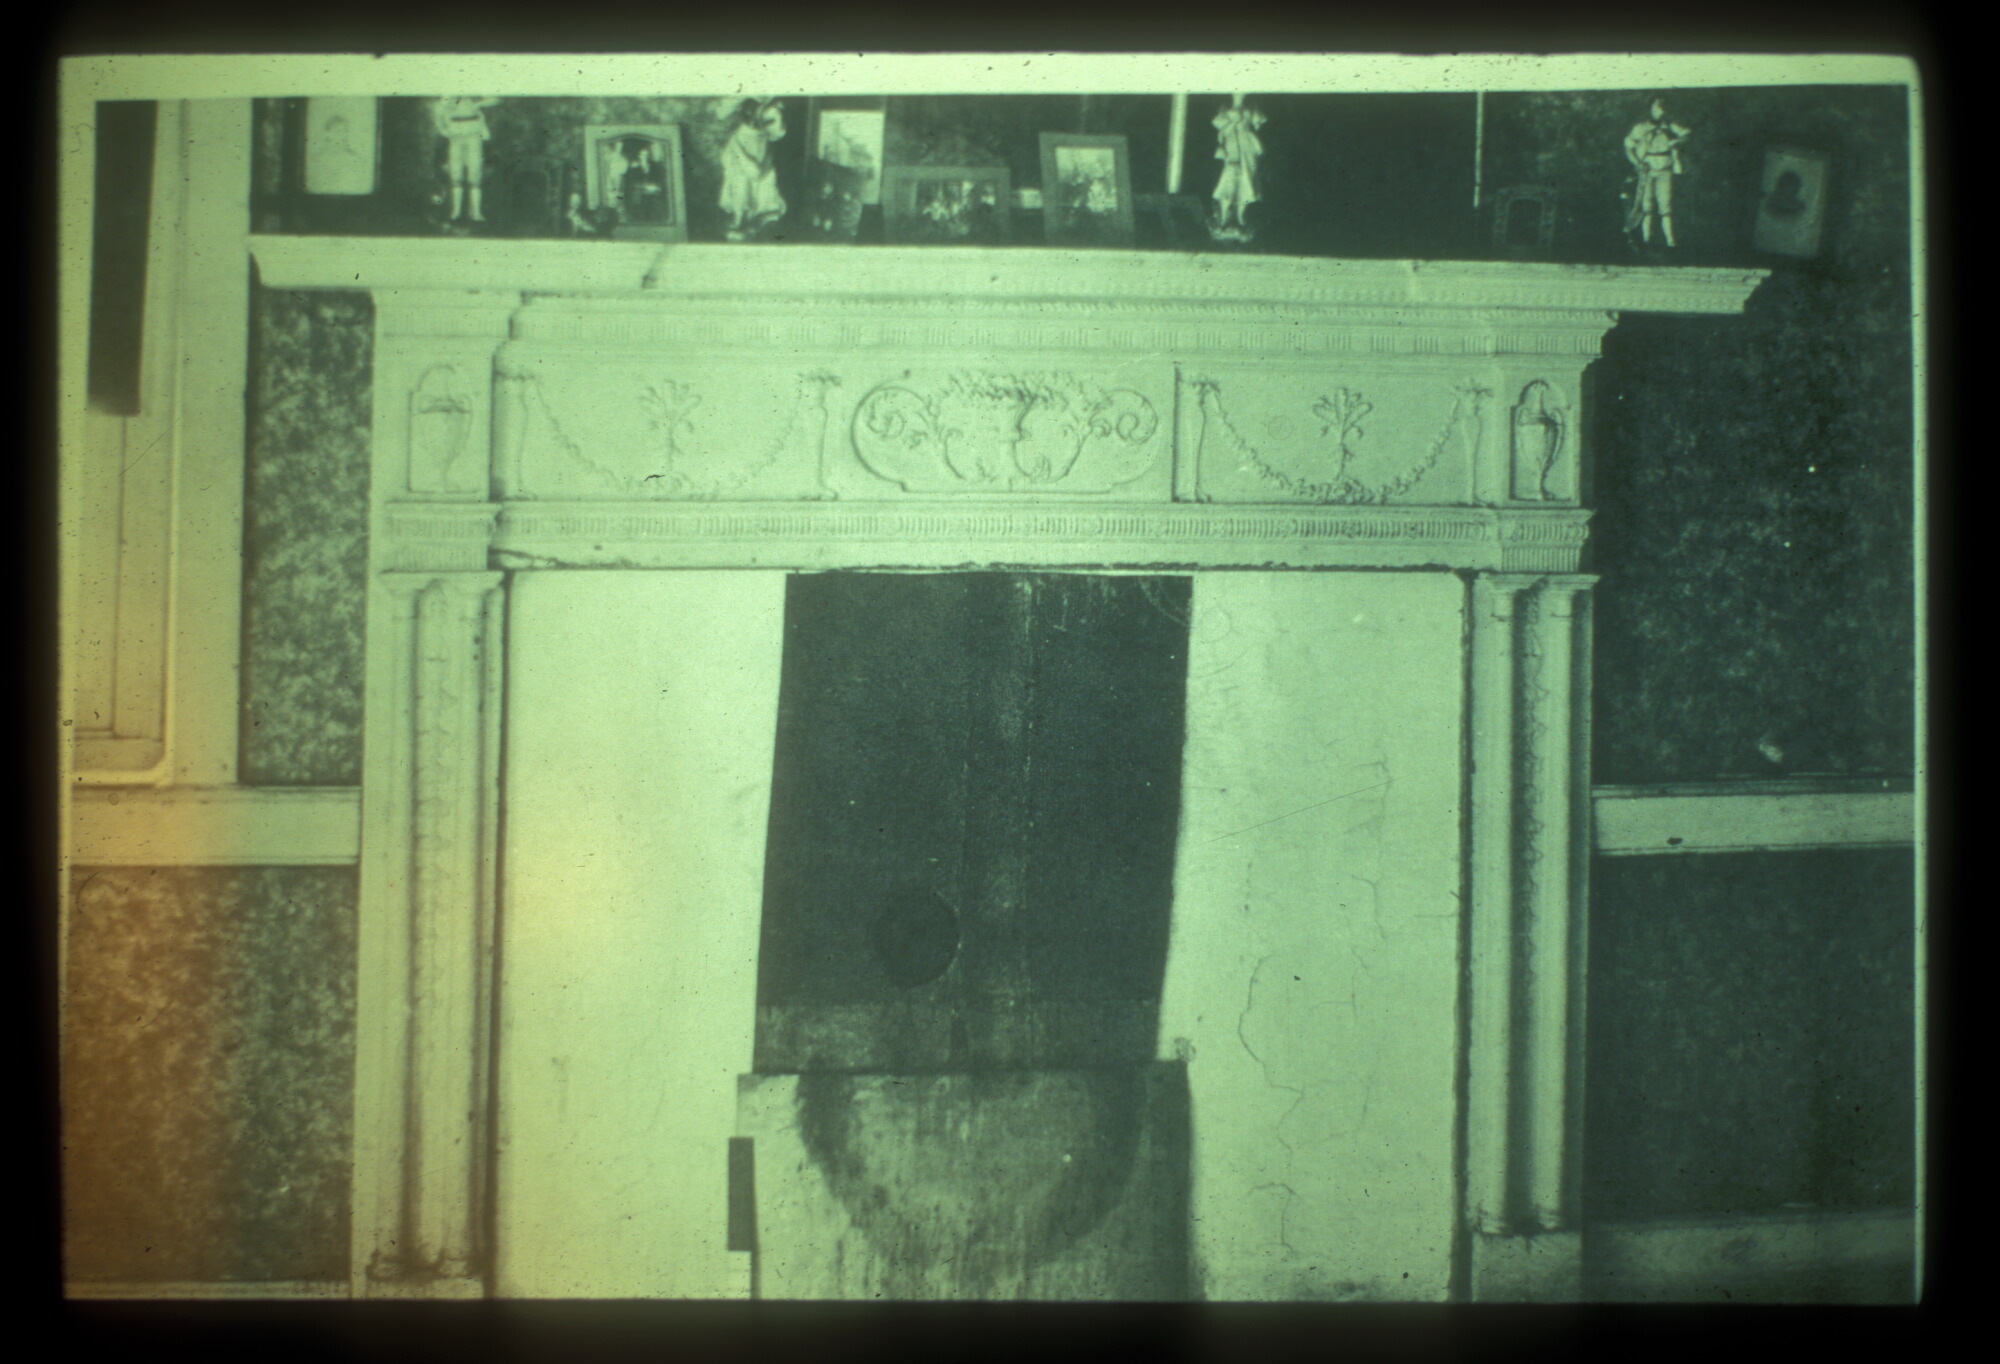 A highly decorated/molded mantle piece with small items on the shelf. Textured wallpaper is visible in the background.